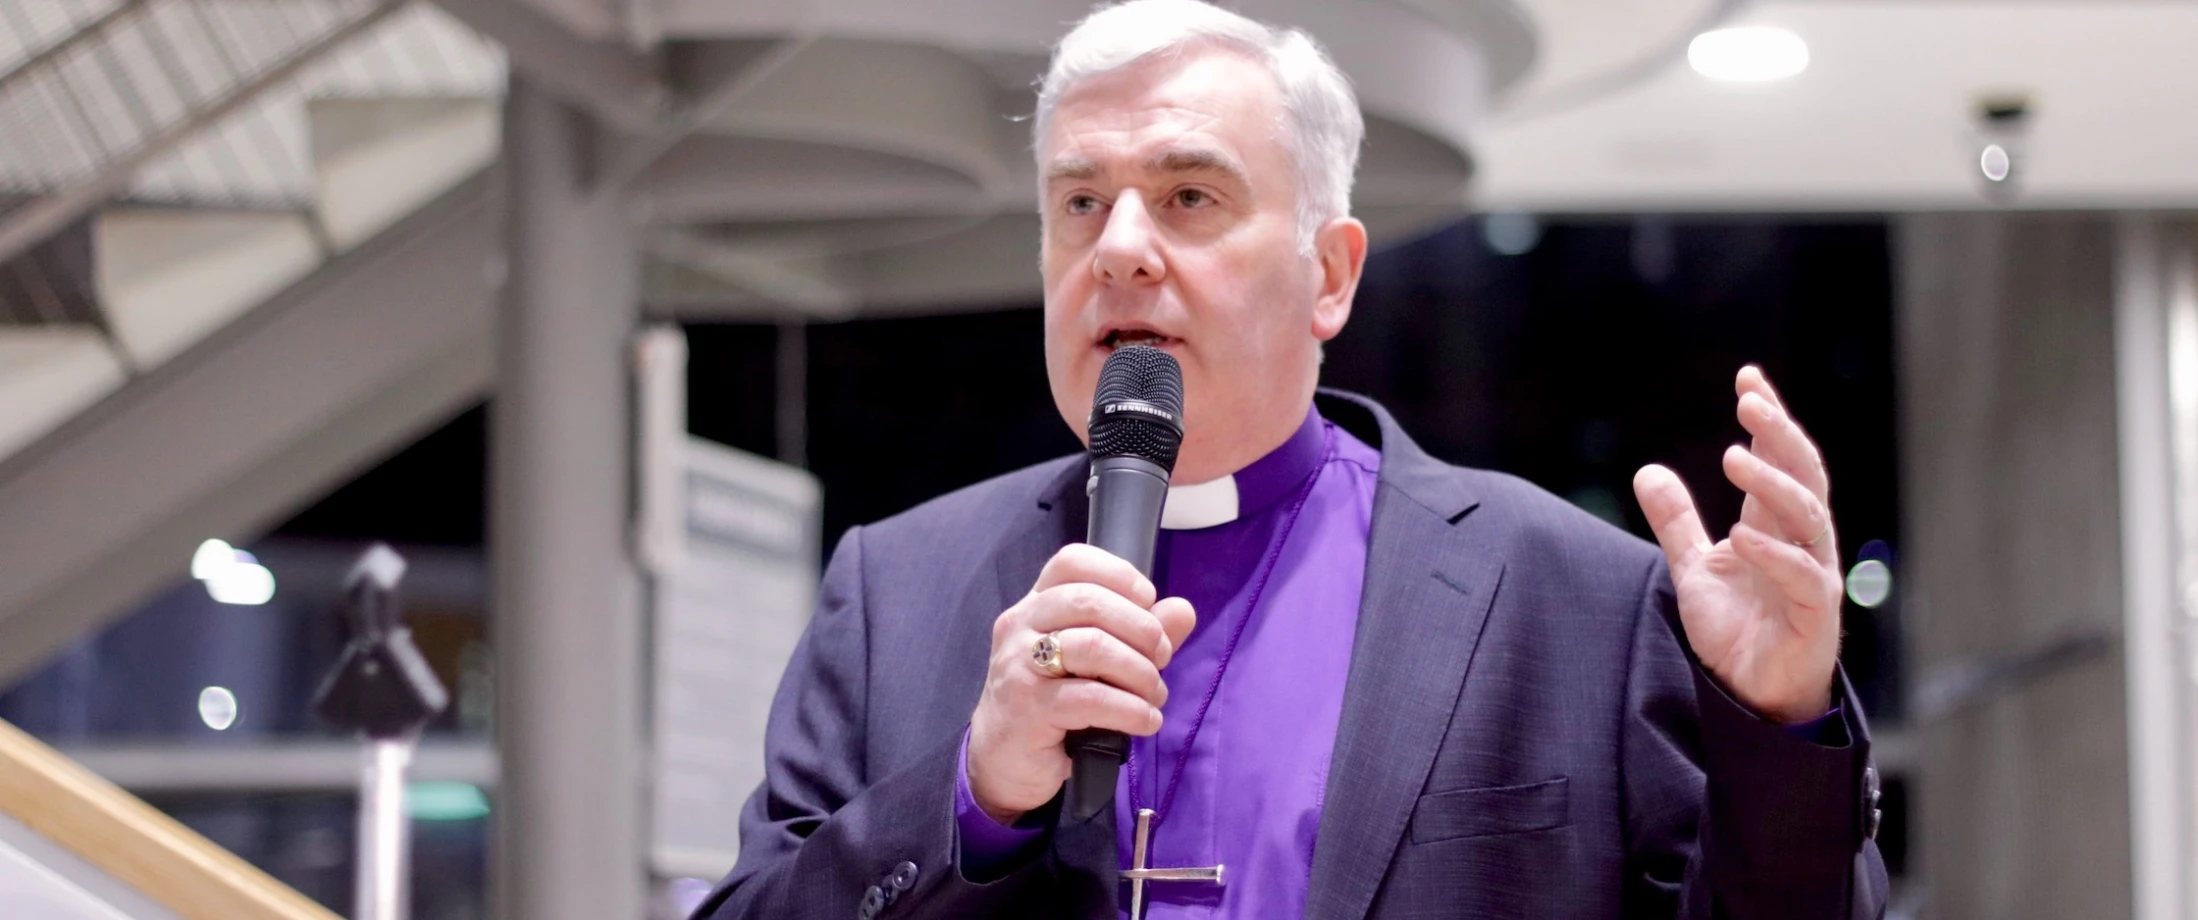 Services of worship to be suspended but we continue to be church – a letter from Bishop David